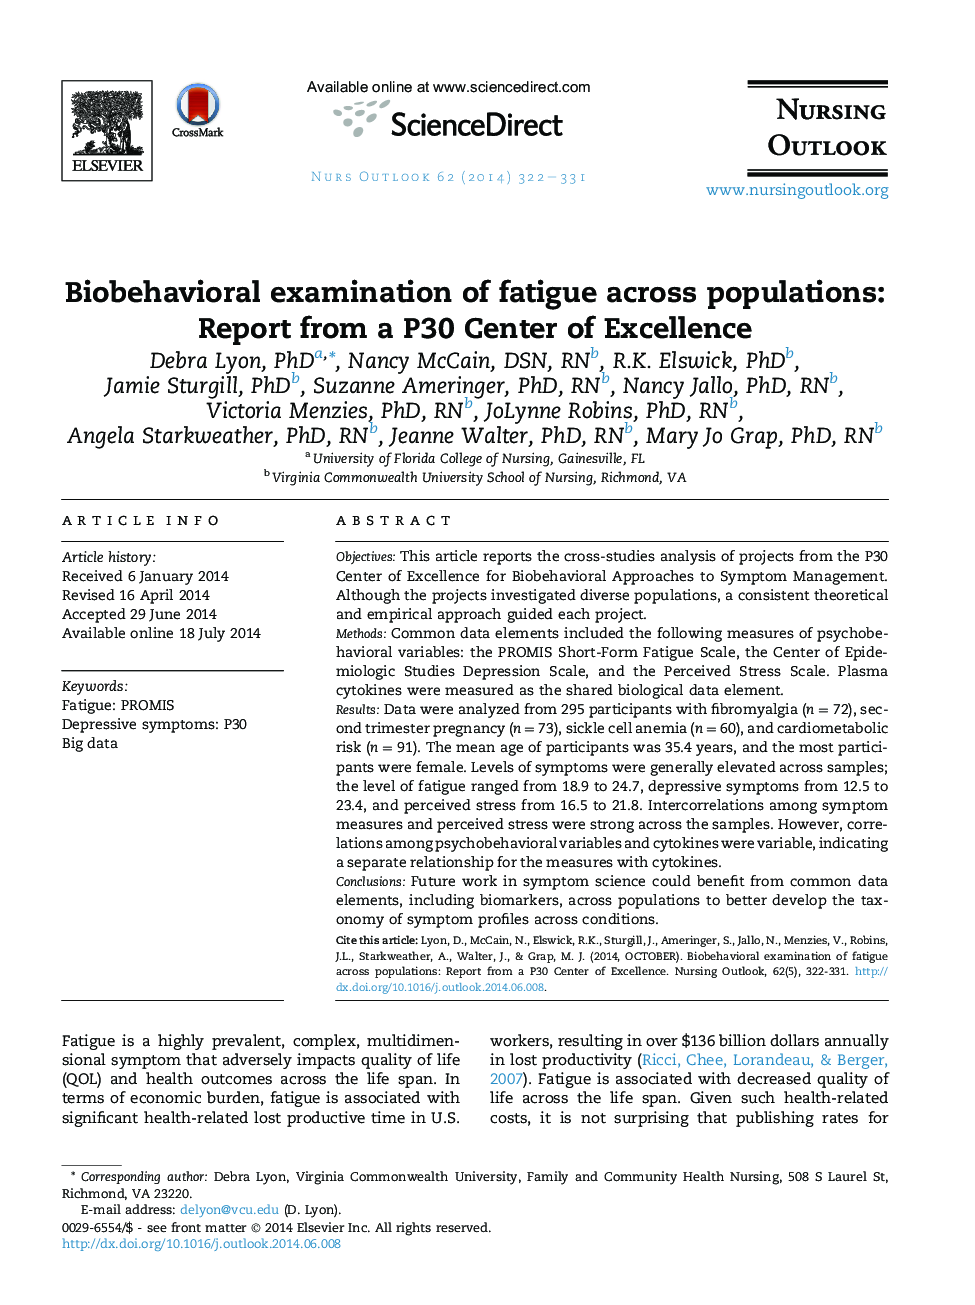 Biobehavioral examination of fatigue across populations: Report from a P30 Center of Excellence